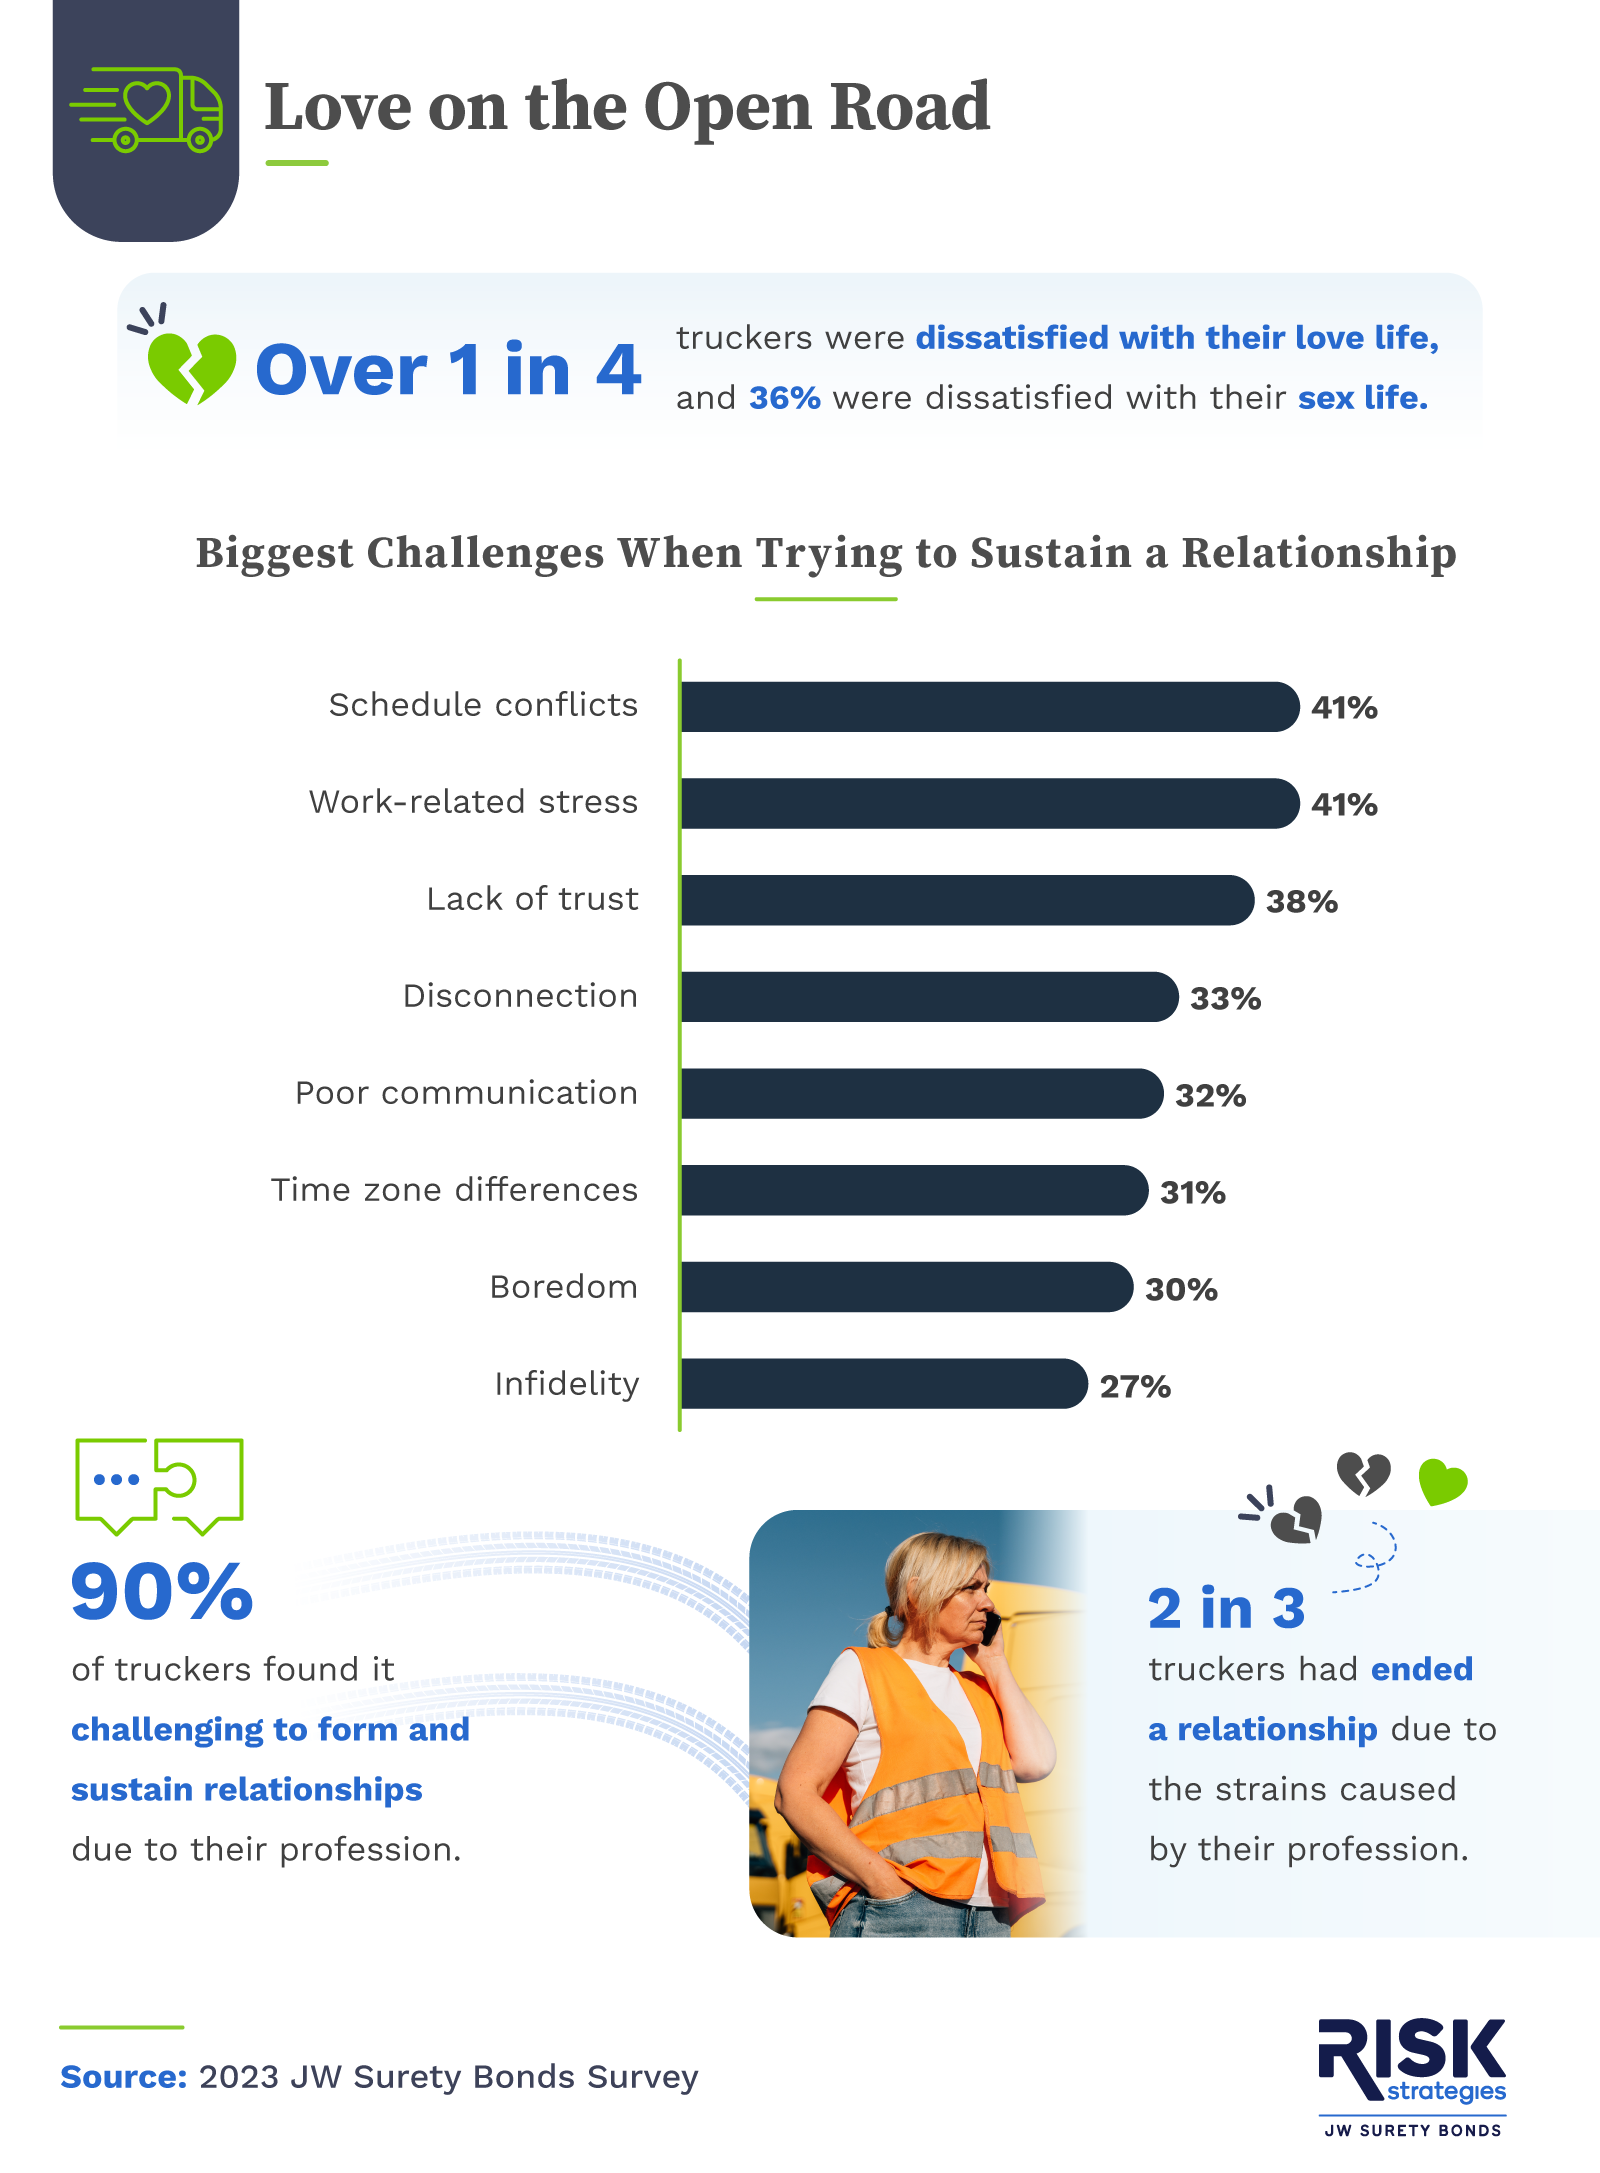 Challenges when trying to sustain a relationship